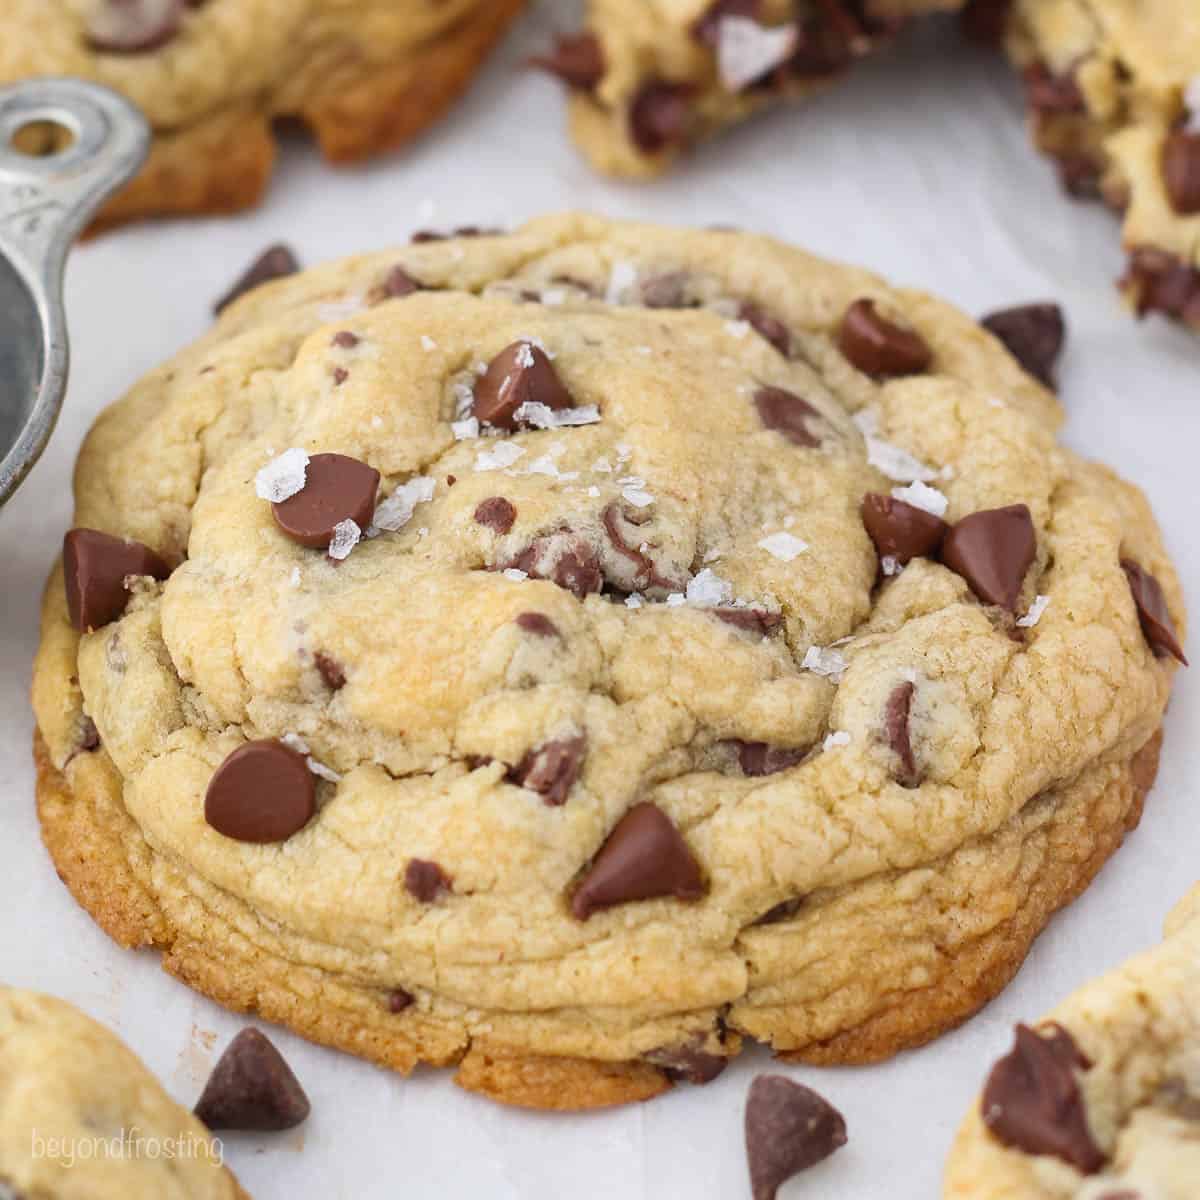 https://beyondfrosting.com/wp-content/uploads/2022/03/Thick-Chocolate-Chip-Cookies-0818-2.jpg